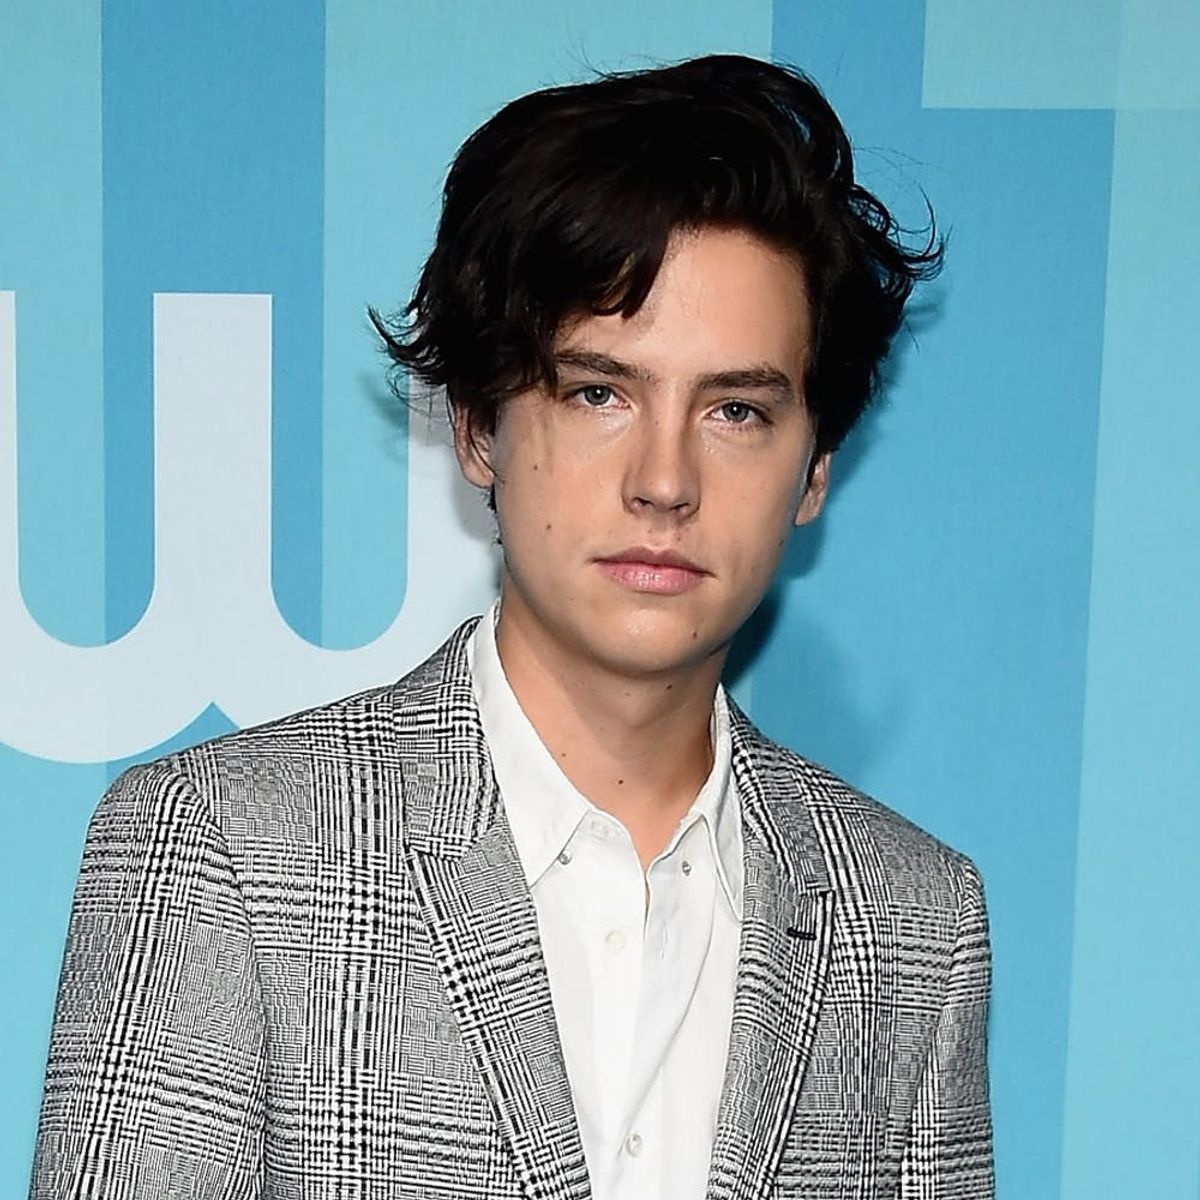 Riverdale’s Cole Sprouse Responds to Those IRL Lili Reinhart Romance Rumors